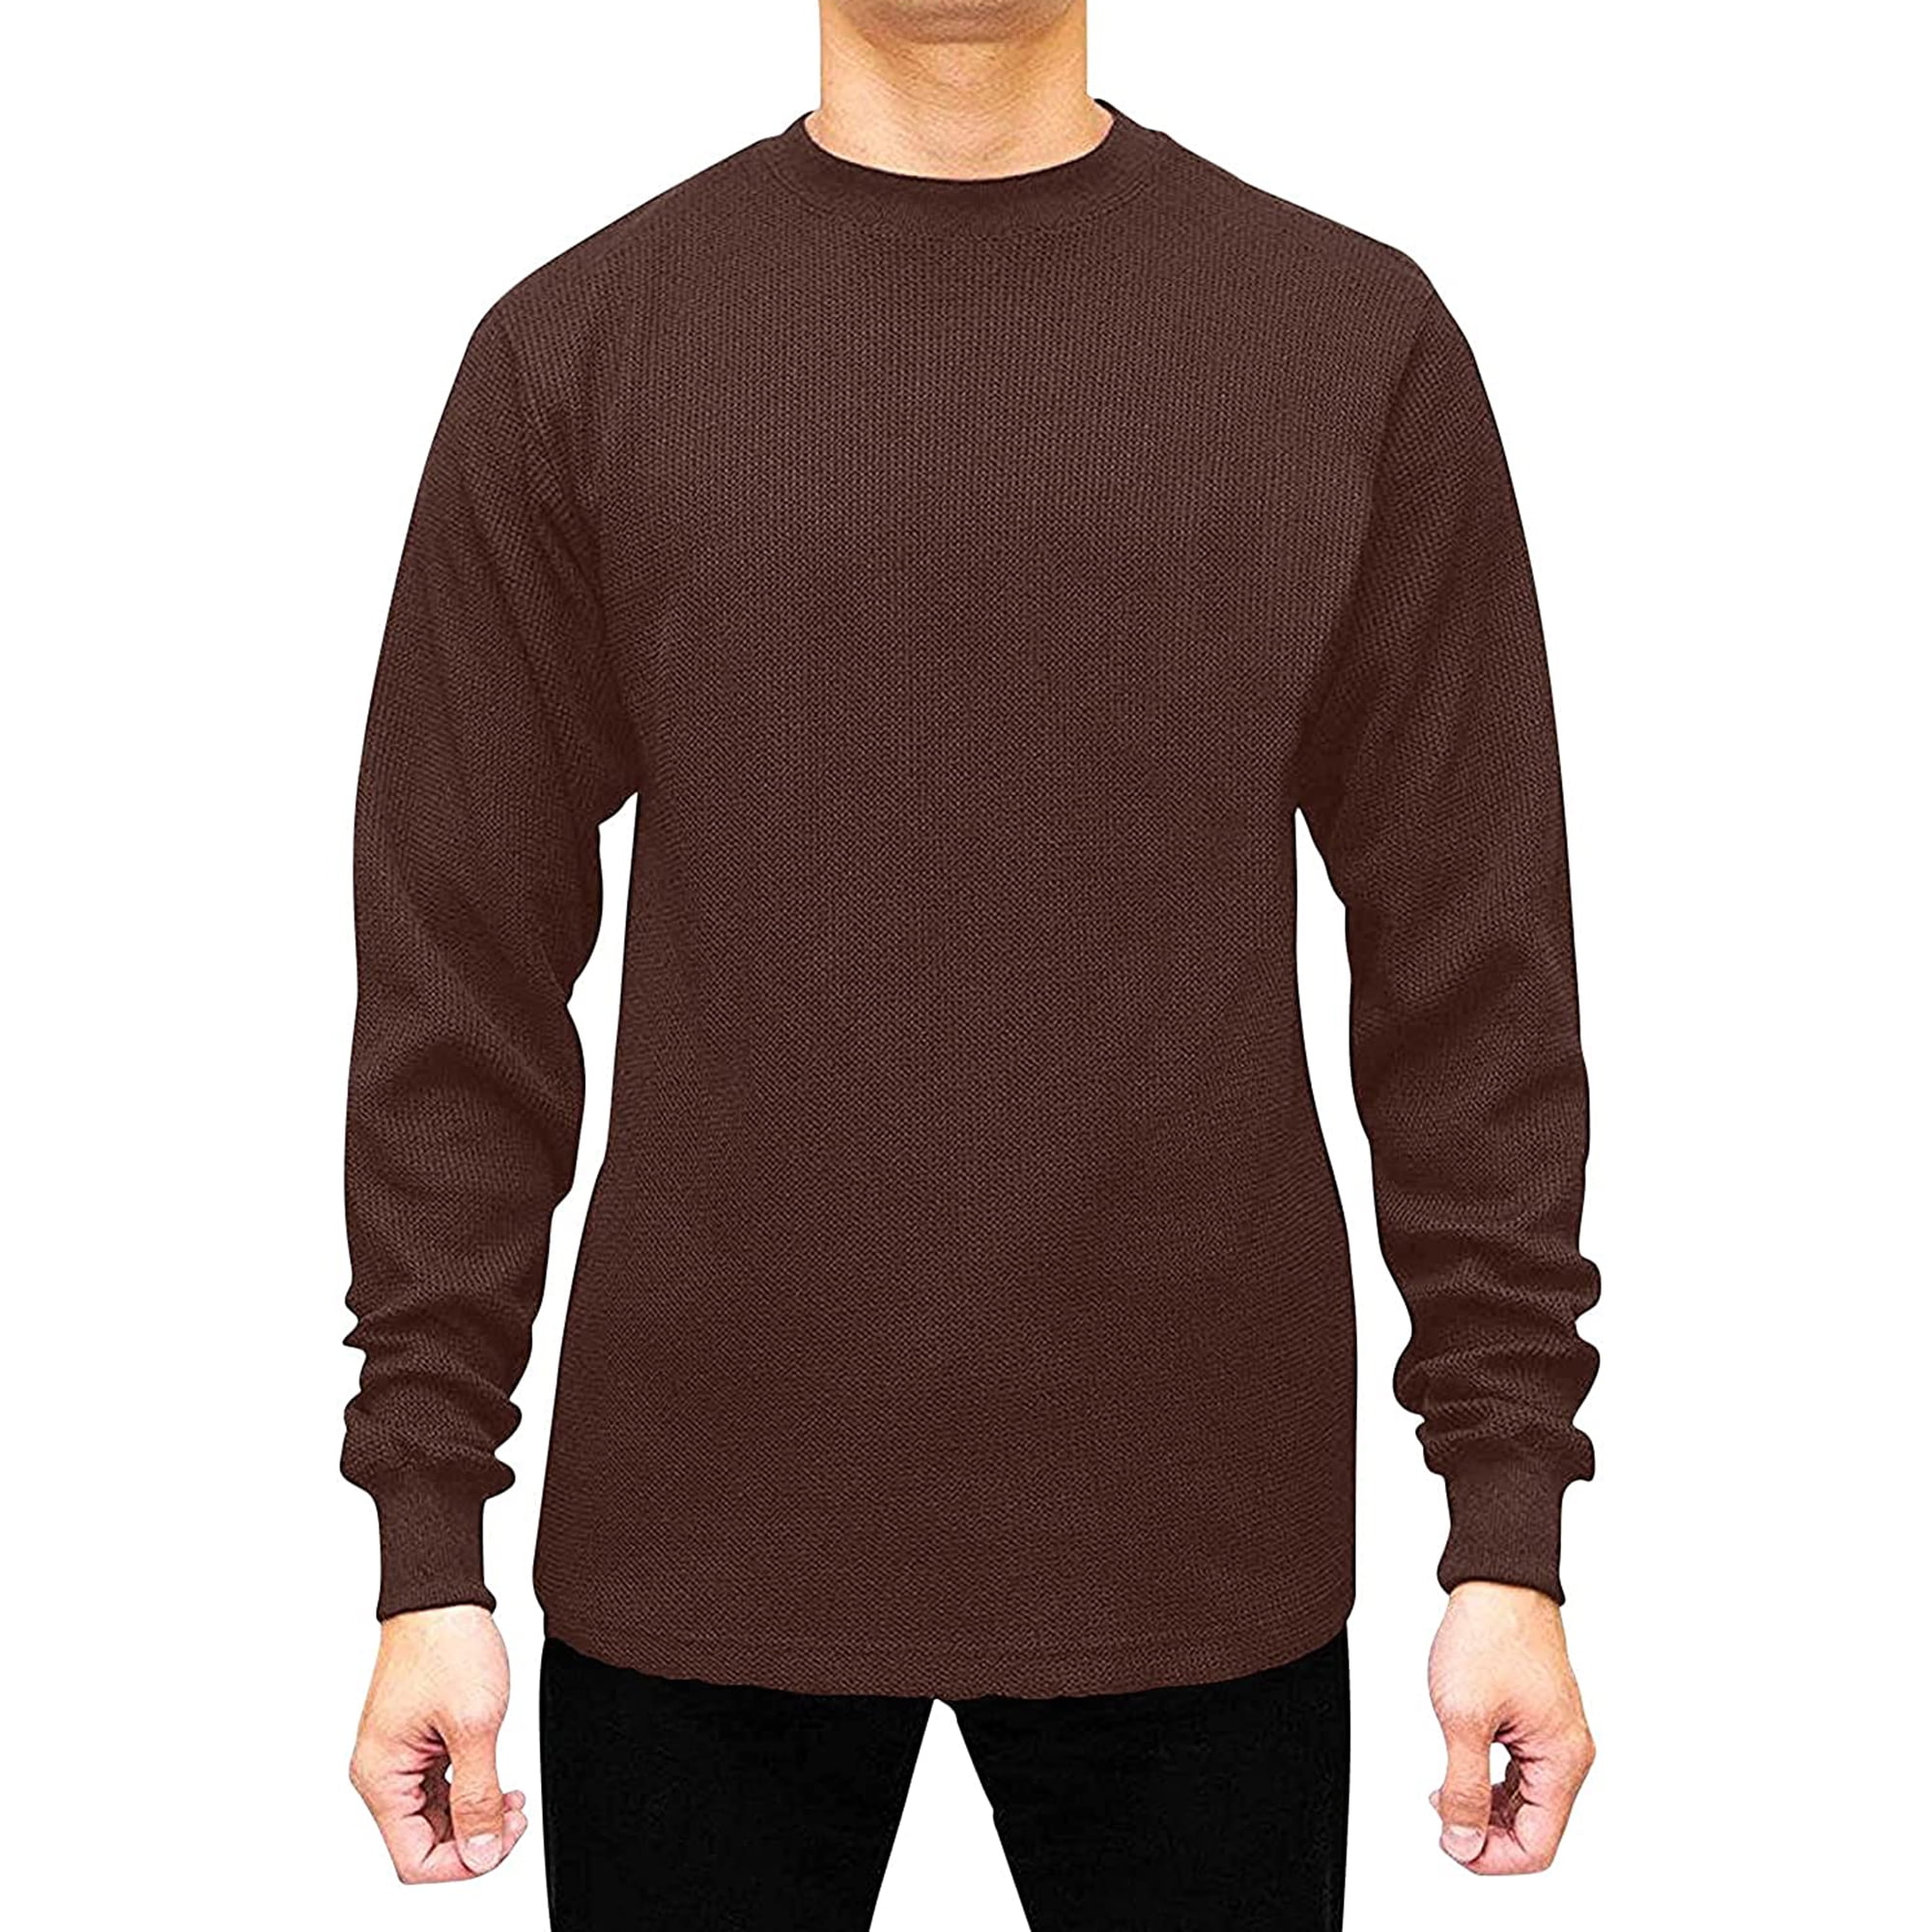 JMR USA INC Long Sleeve Crew Neck Waffle Knit Thermal Shirt for 